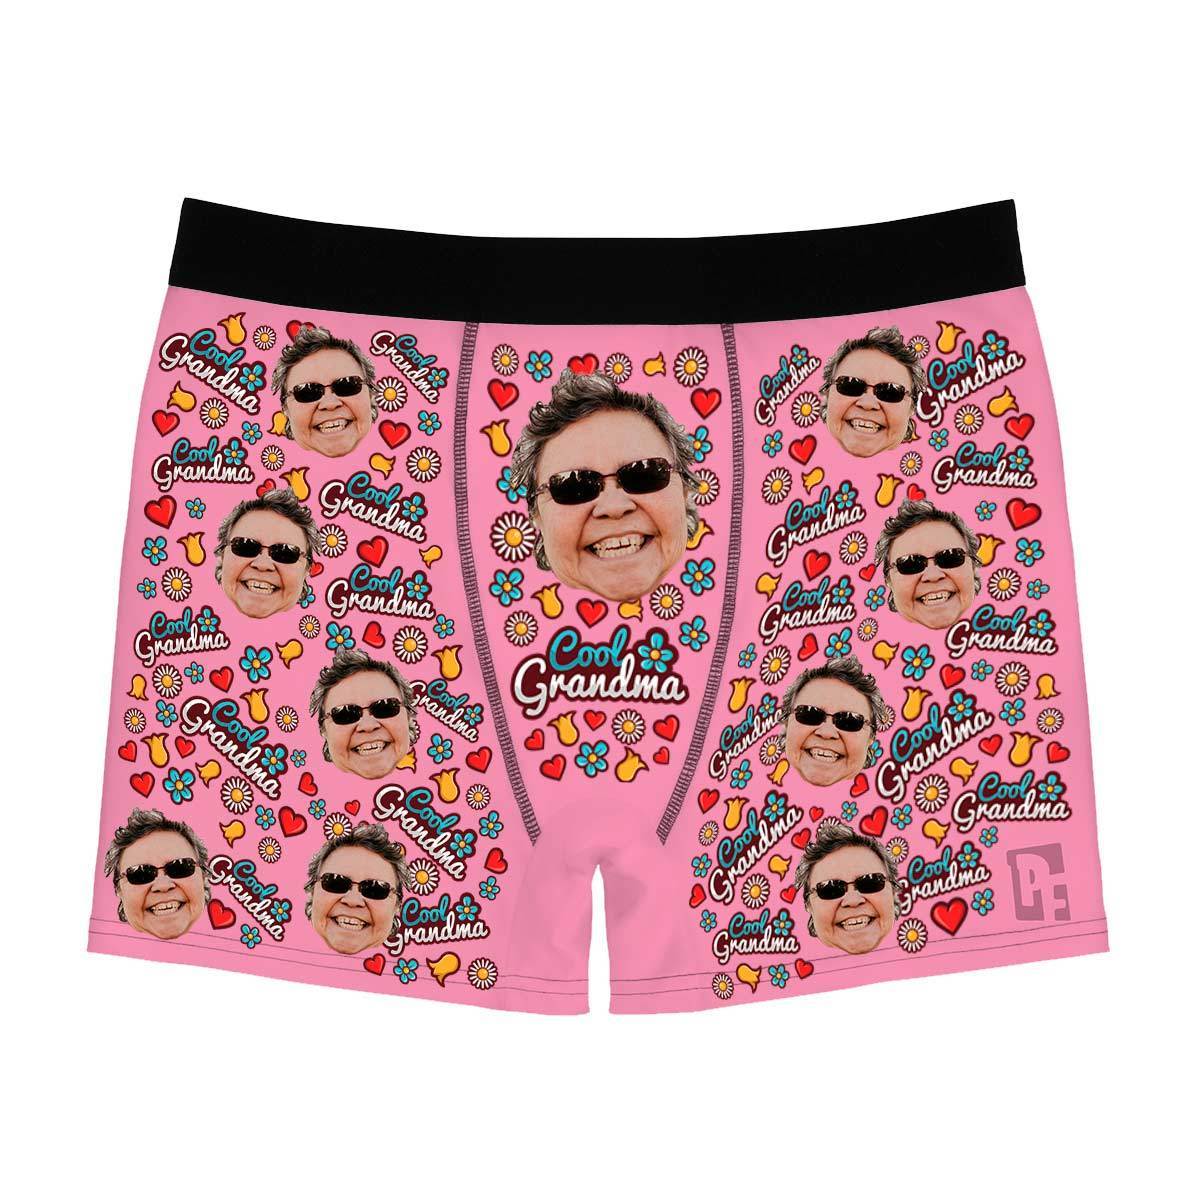 Pink Cool Grandmother men's boxer briefs personalized with photo printed on them